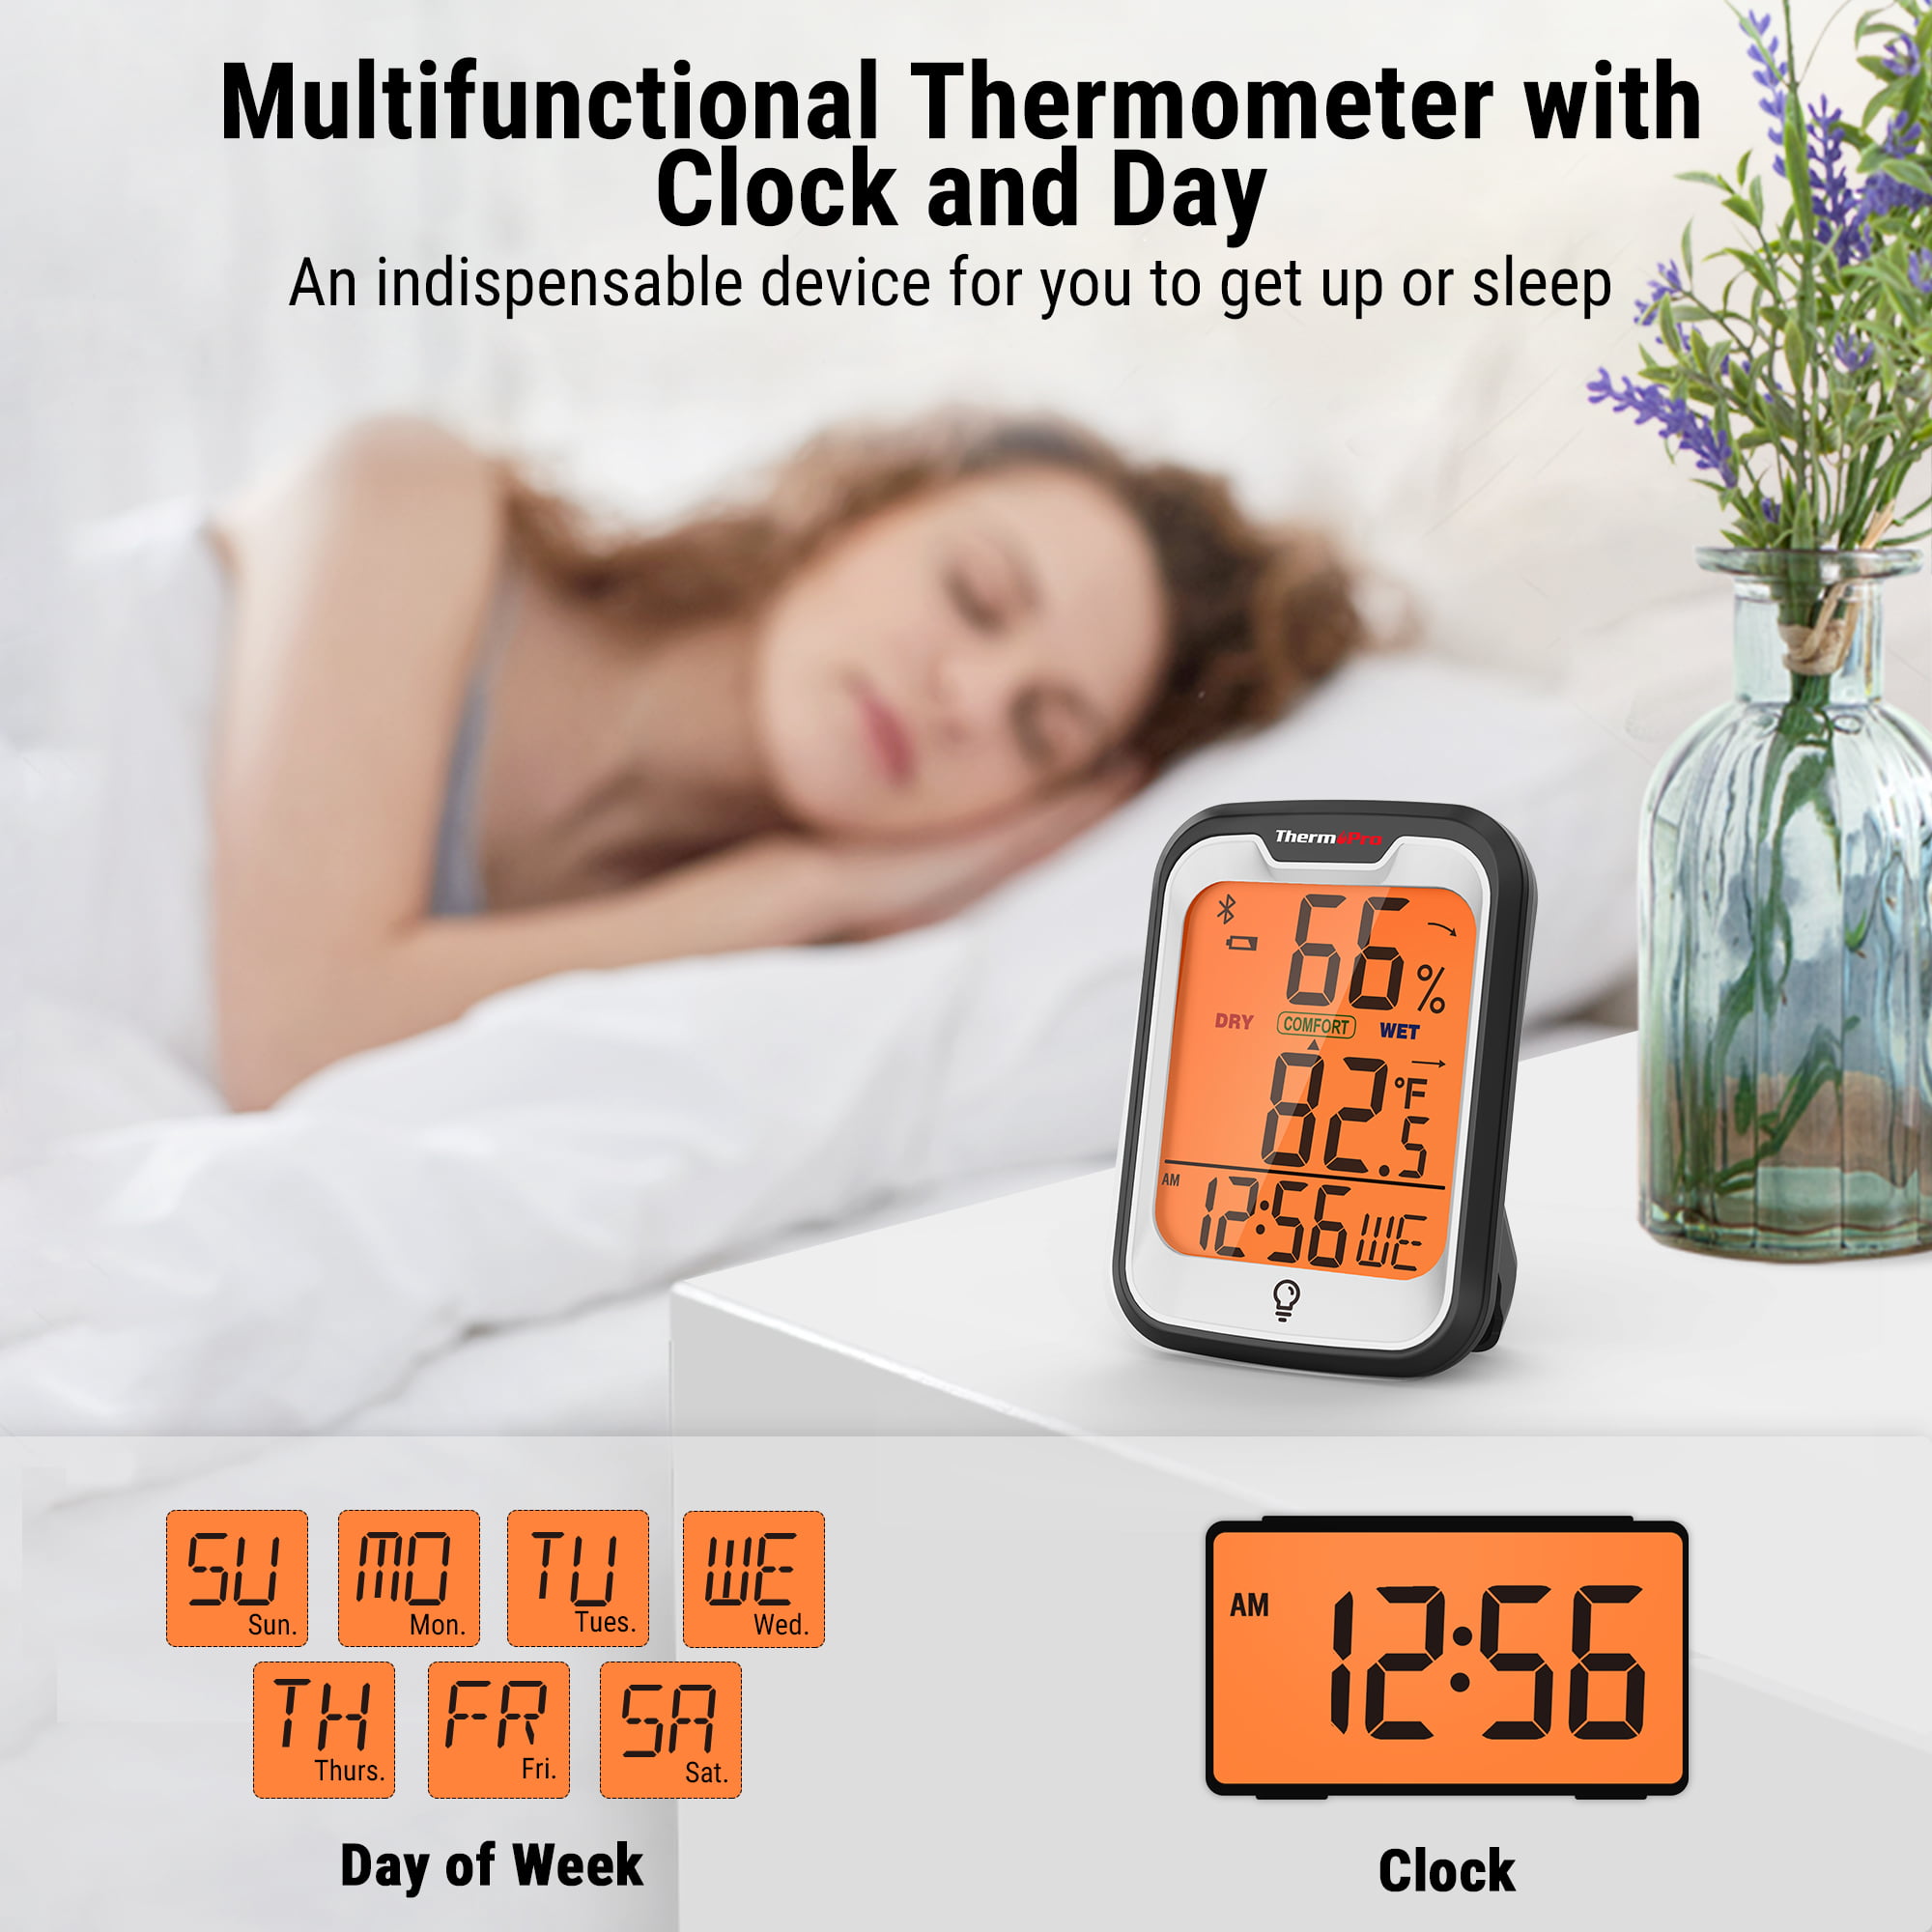 ThermoPro TP359W Bluetooth Hygrometer Thermometer, 260FT Wireless Remote  Temperature and Humidity Monitor, with Large Backlit LCD, Indoor Room